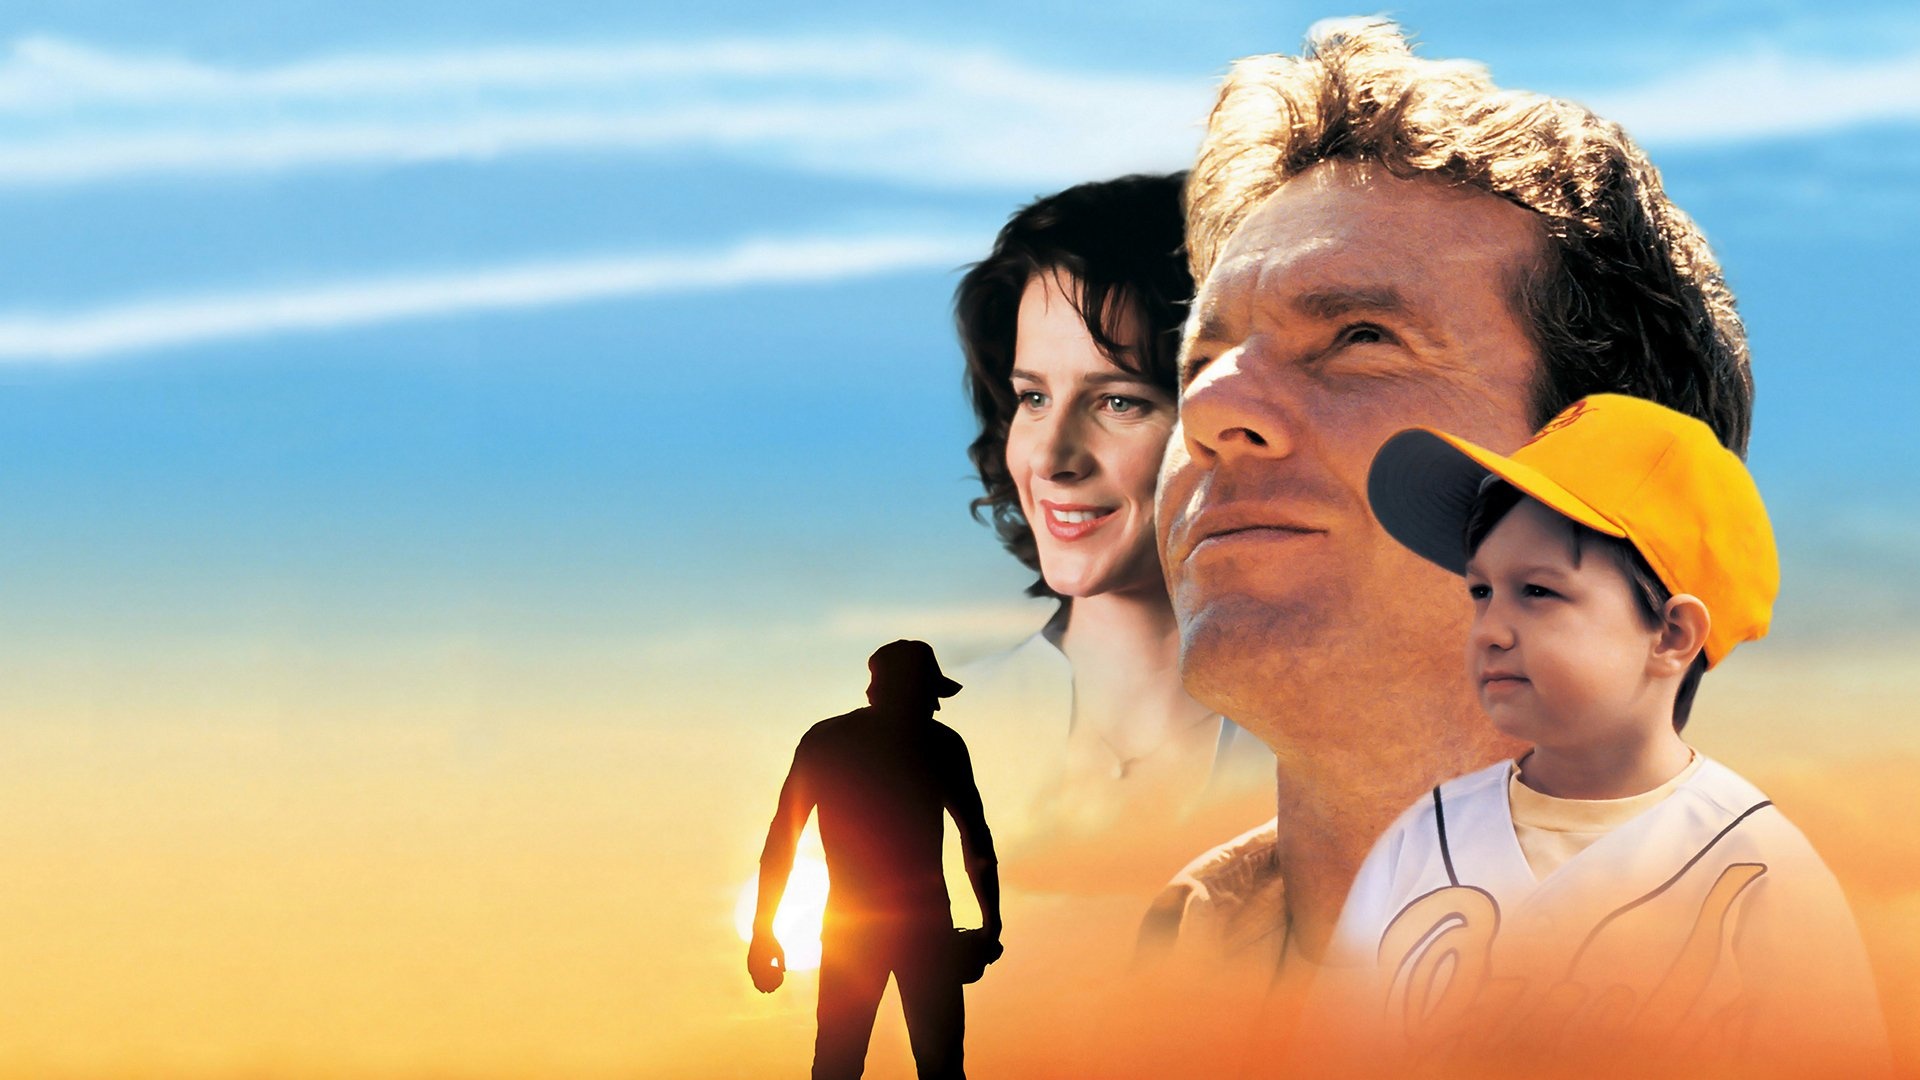 The Rookie 2002, HD Wallpapers, Background images, Dennis Quaid, 1920x1080 Full HD Desktop